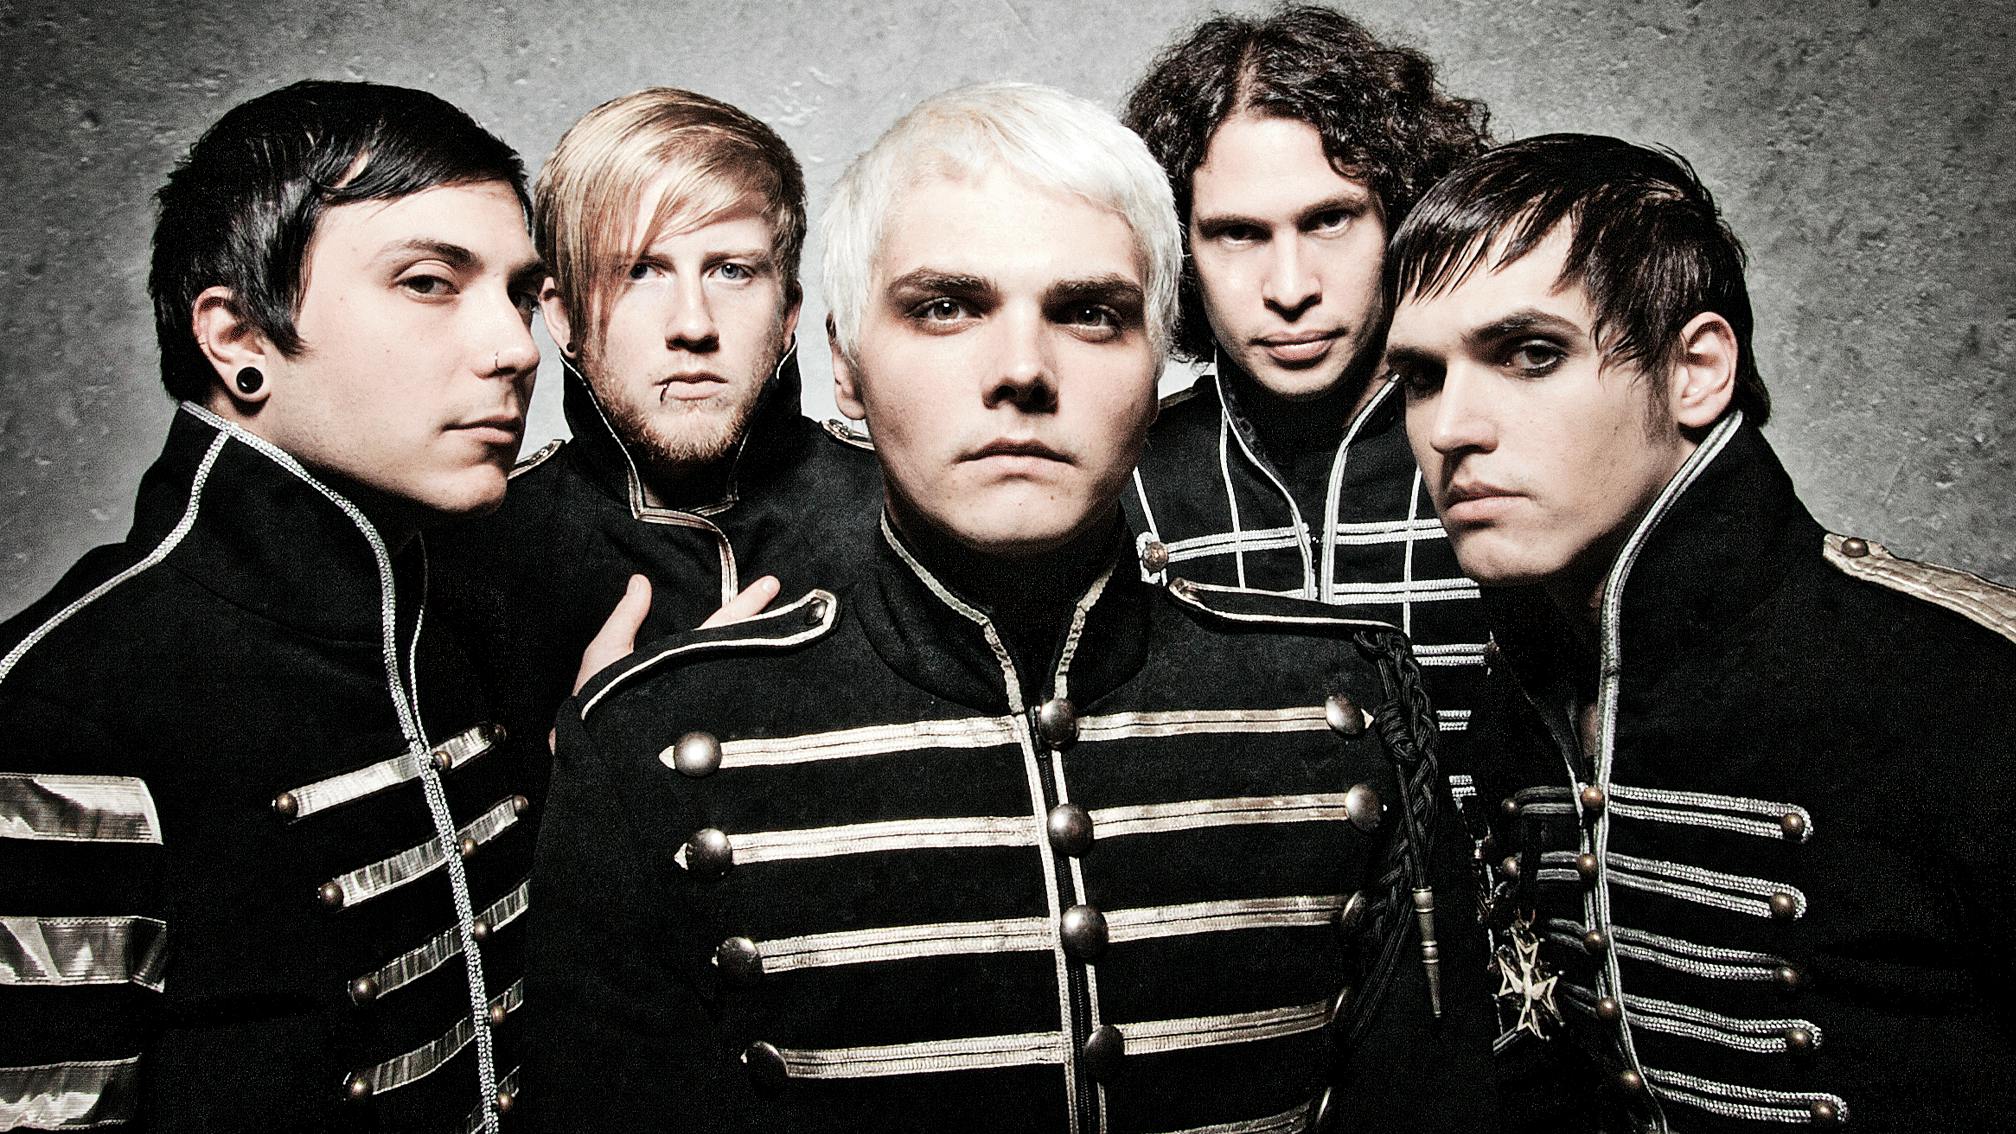 The story of My Chemical Romance’s The Black Parade: “When it was done, I knew that we’d created a monster”